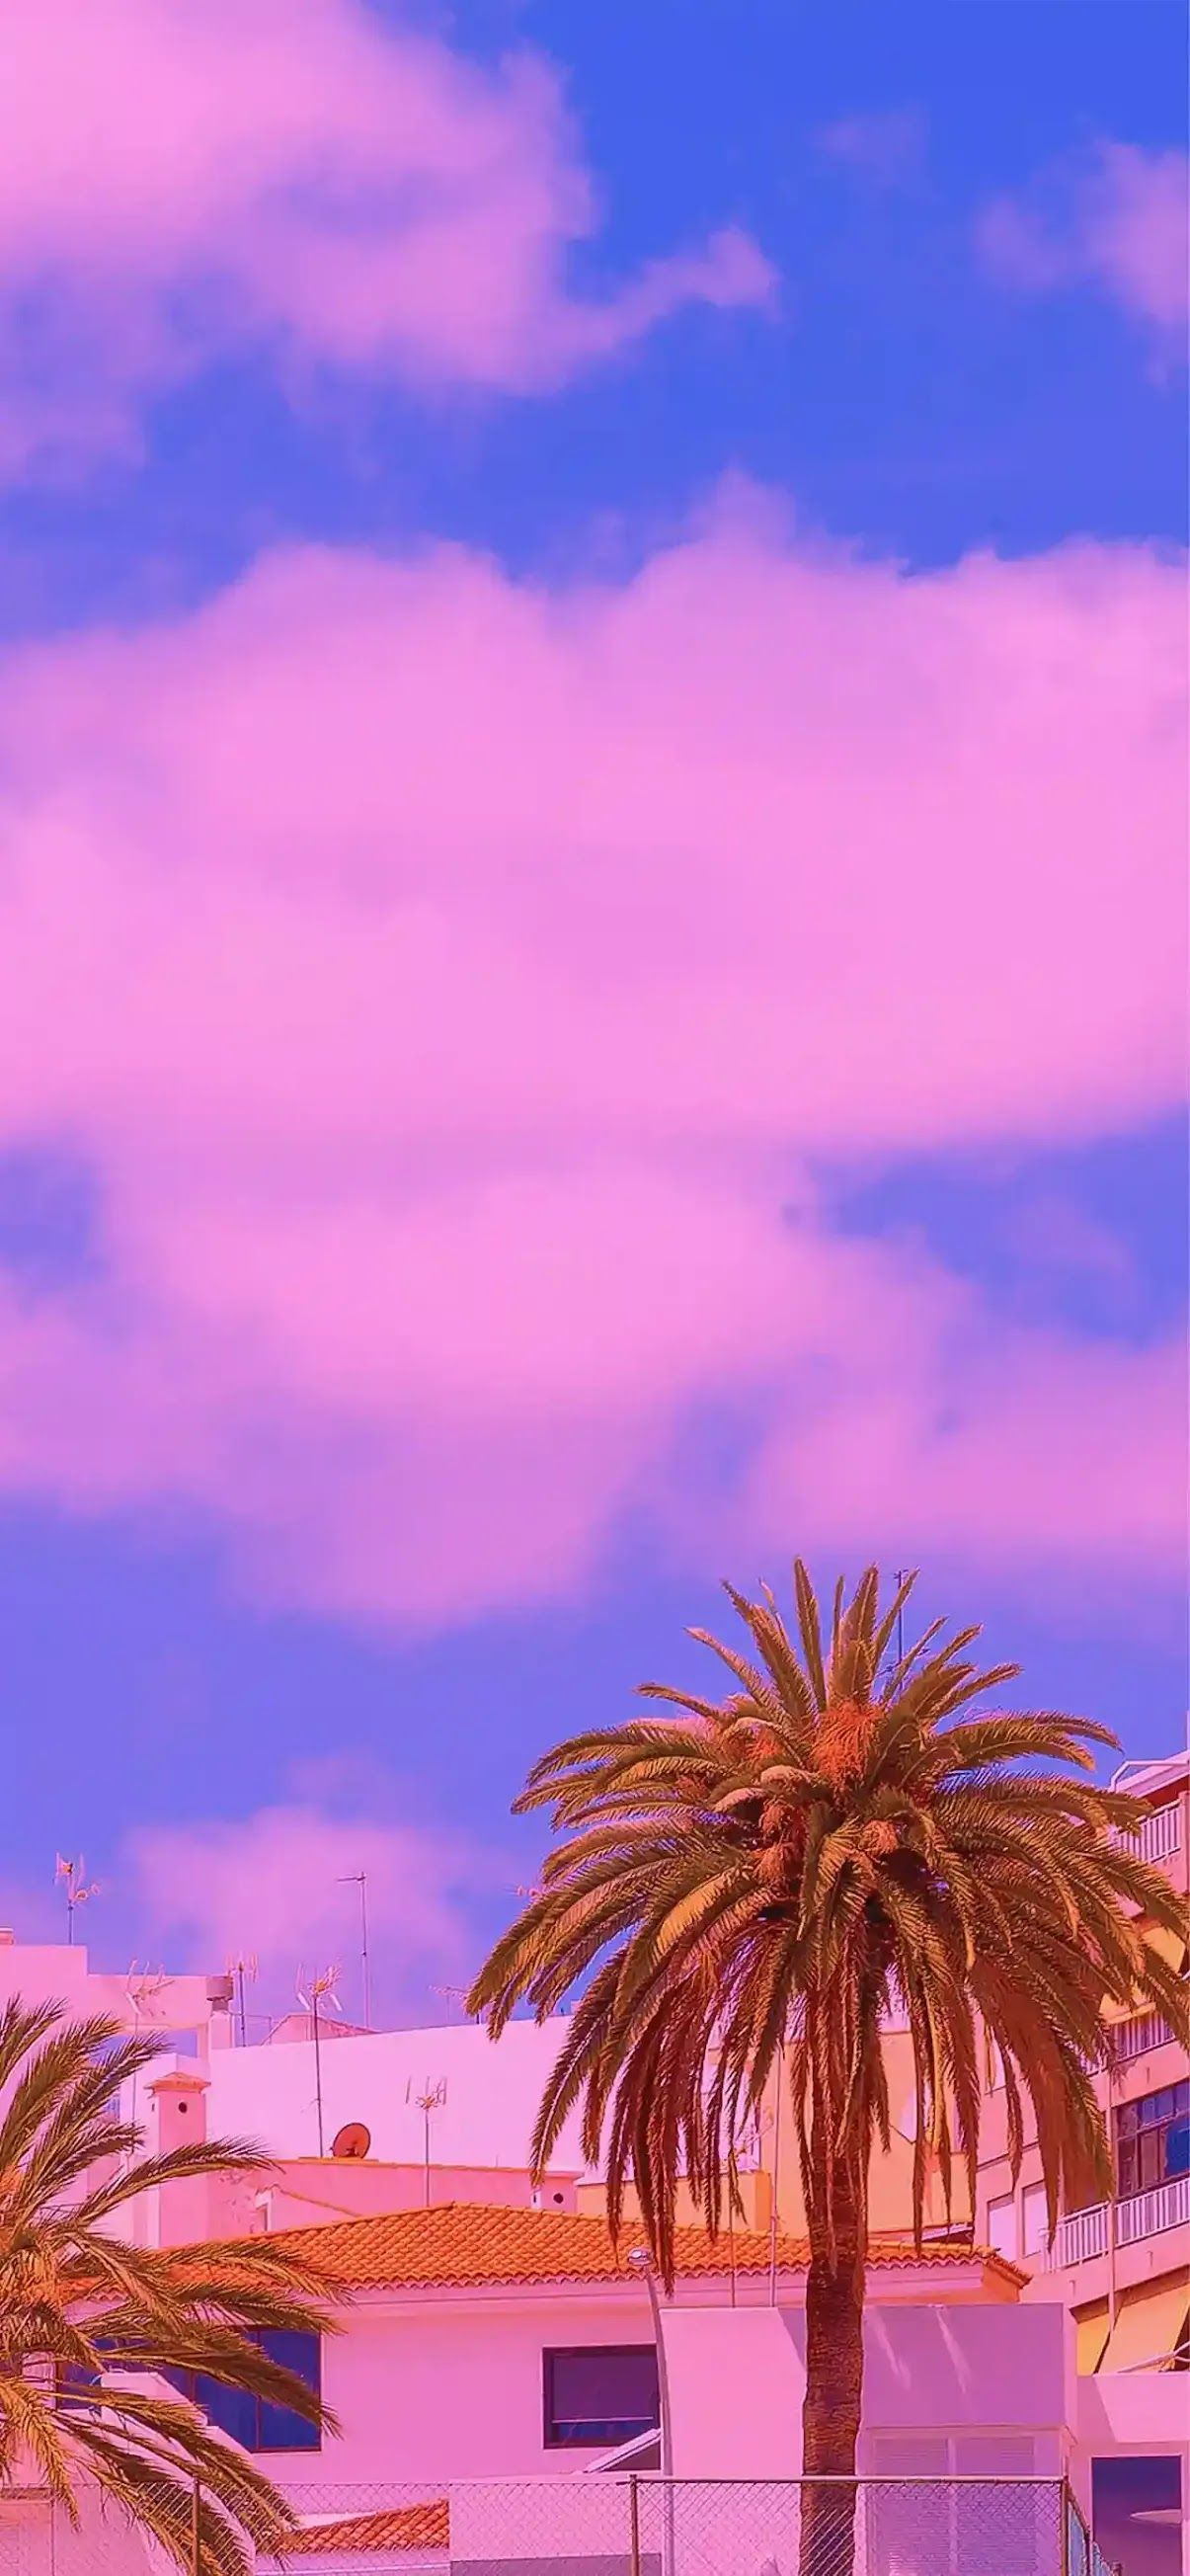 Aesthetic phone wallpaper of a palm tree in front of a pink and blue sky - Sunset, iPhone, beautiful, bling, cute iPhone, palm tree